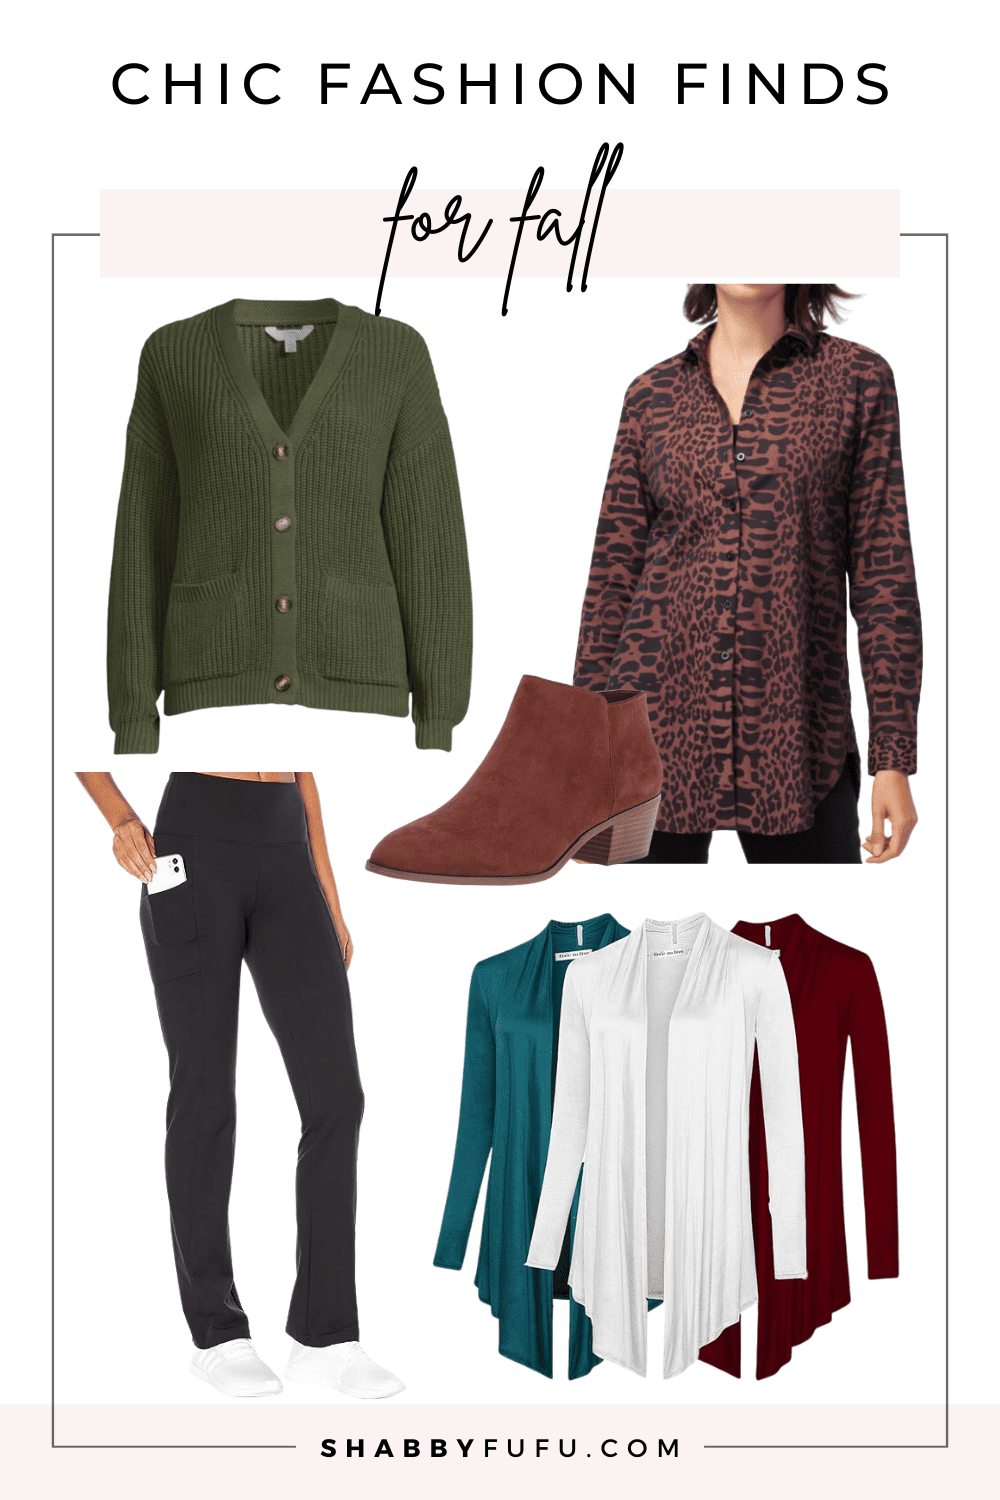 Pinterest collage featuring fashion finds for fall like sweaters, boots and pants.